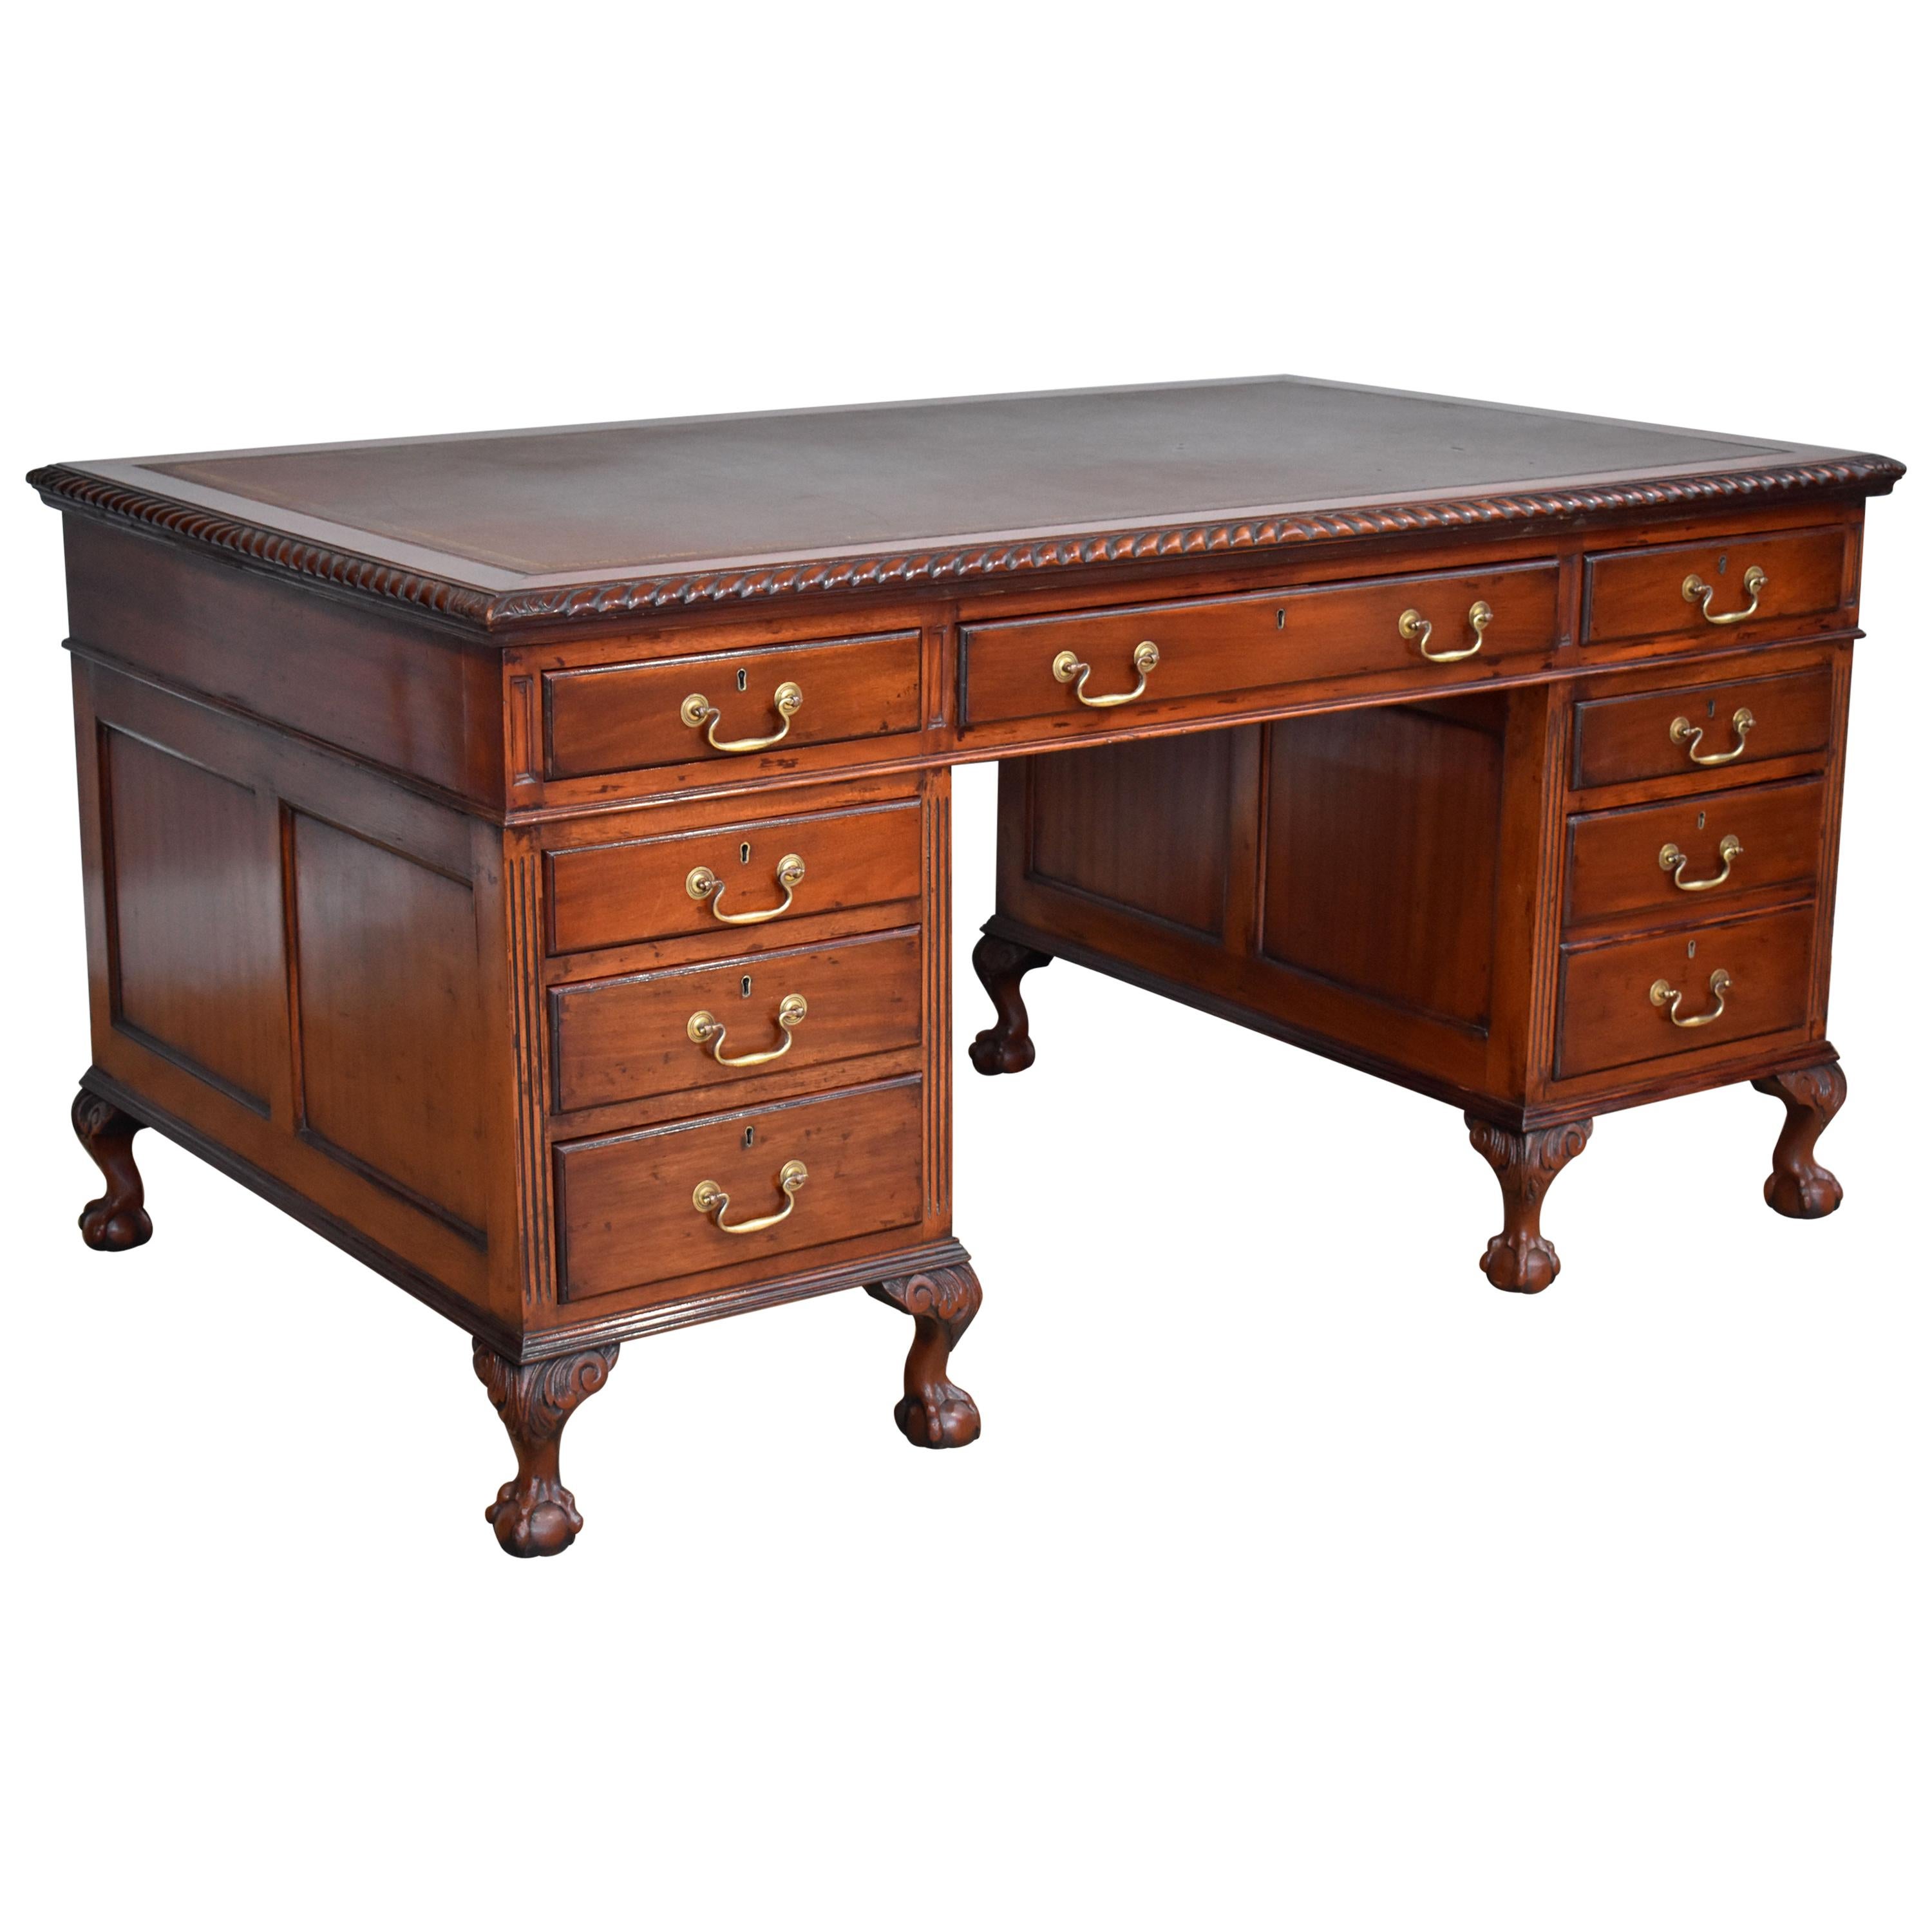 20th Century English Antique Mahogany Chippendale Style Pedestal Desk